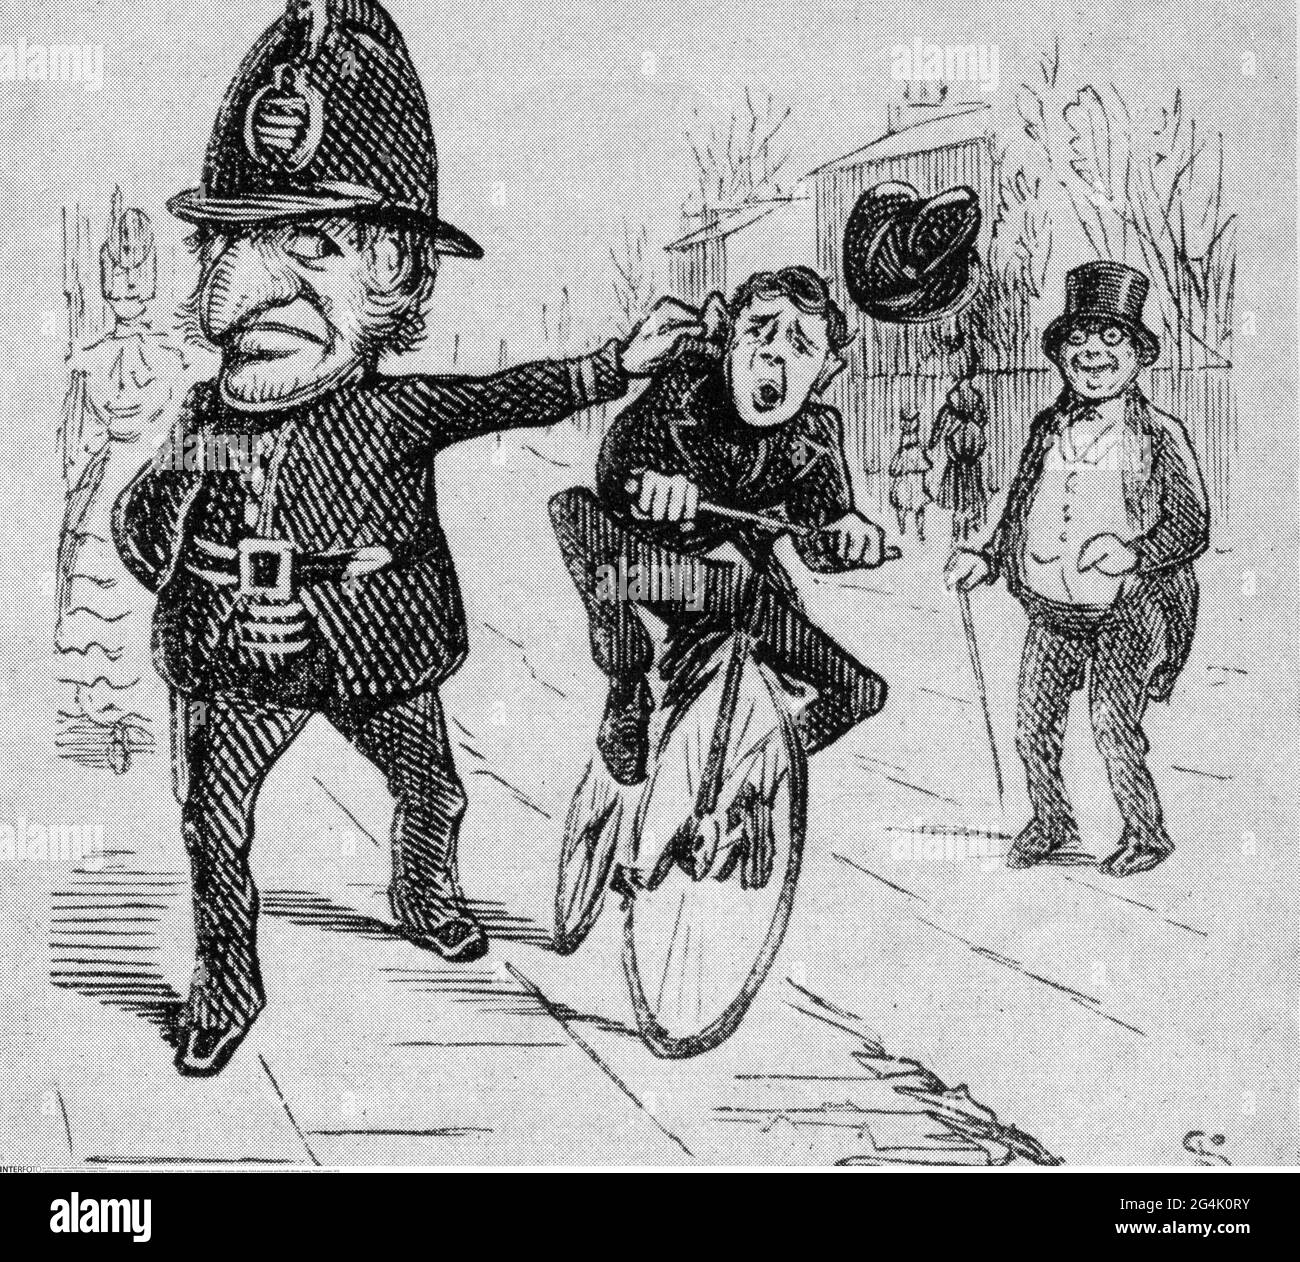 transport / transportation, bicycles, caricature, Punch as policeman and the traffic offender, drawing, ARTIST'S COPYRIGHT HAS NOT TO BE CLEARED Stock Photo